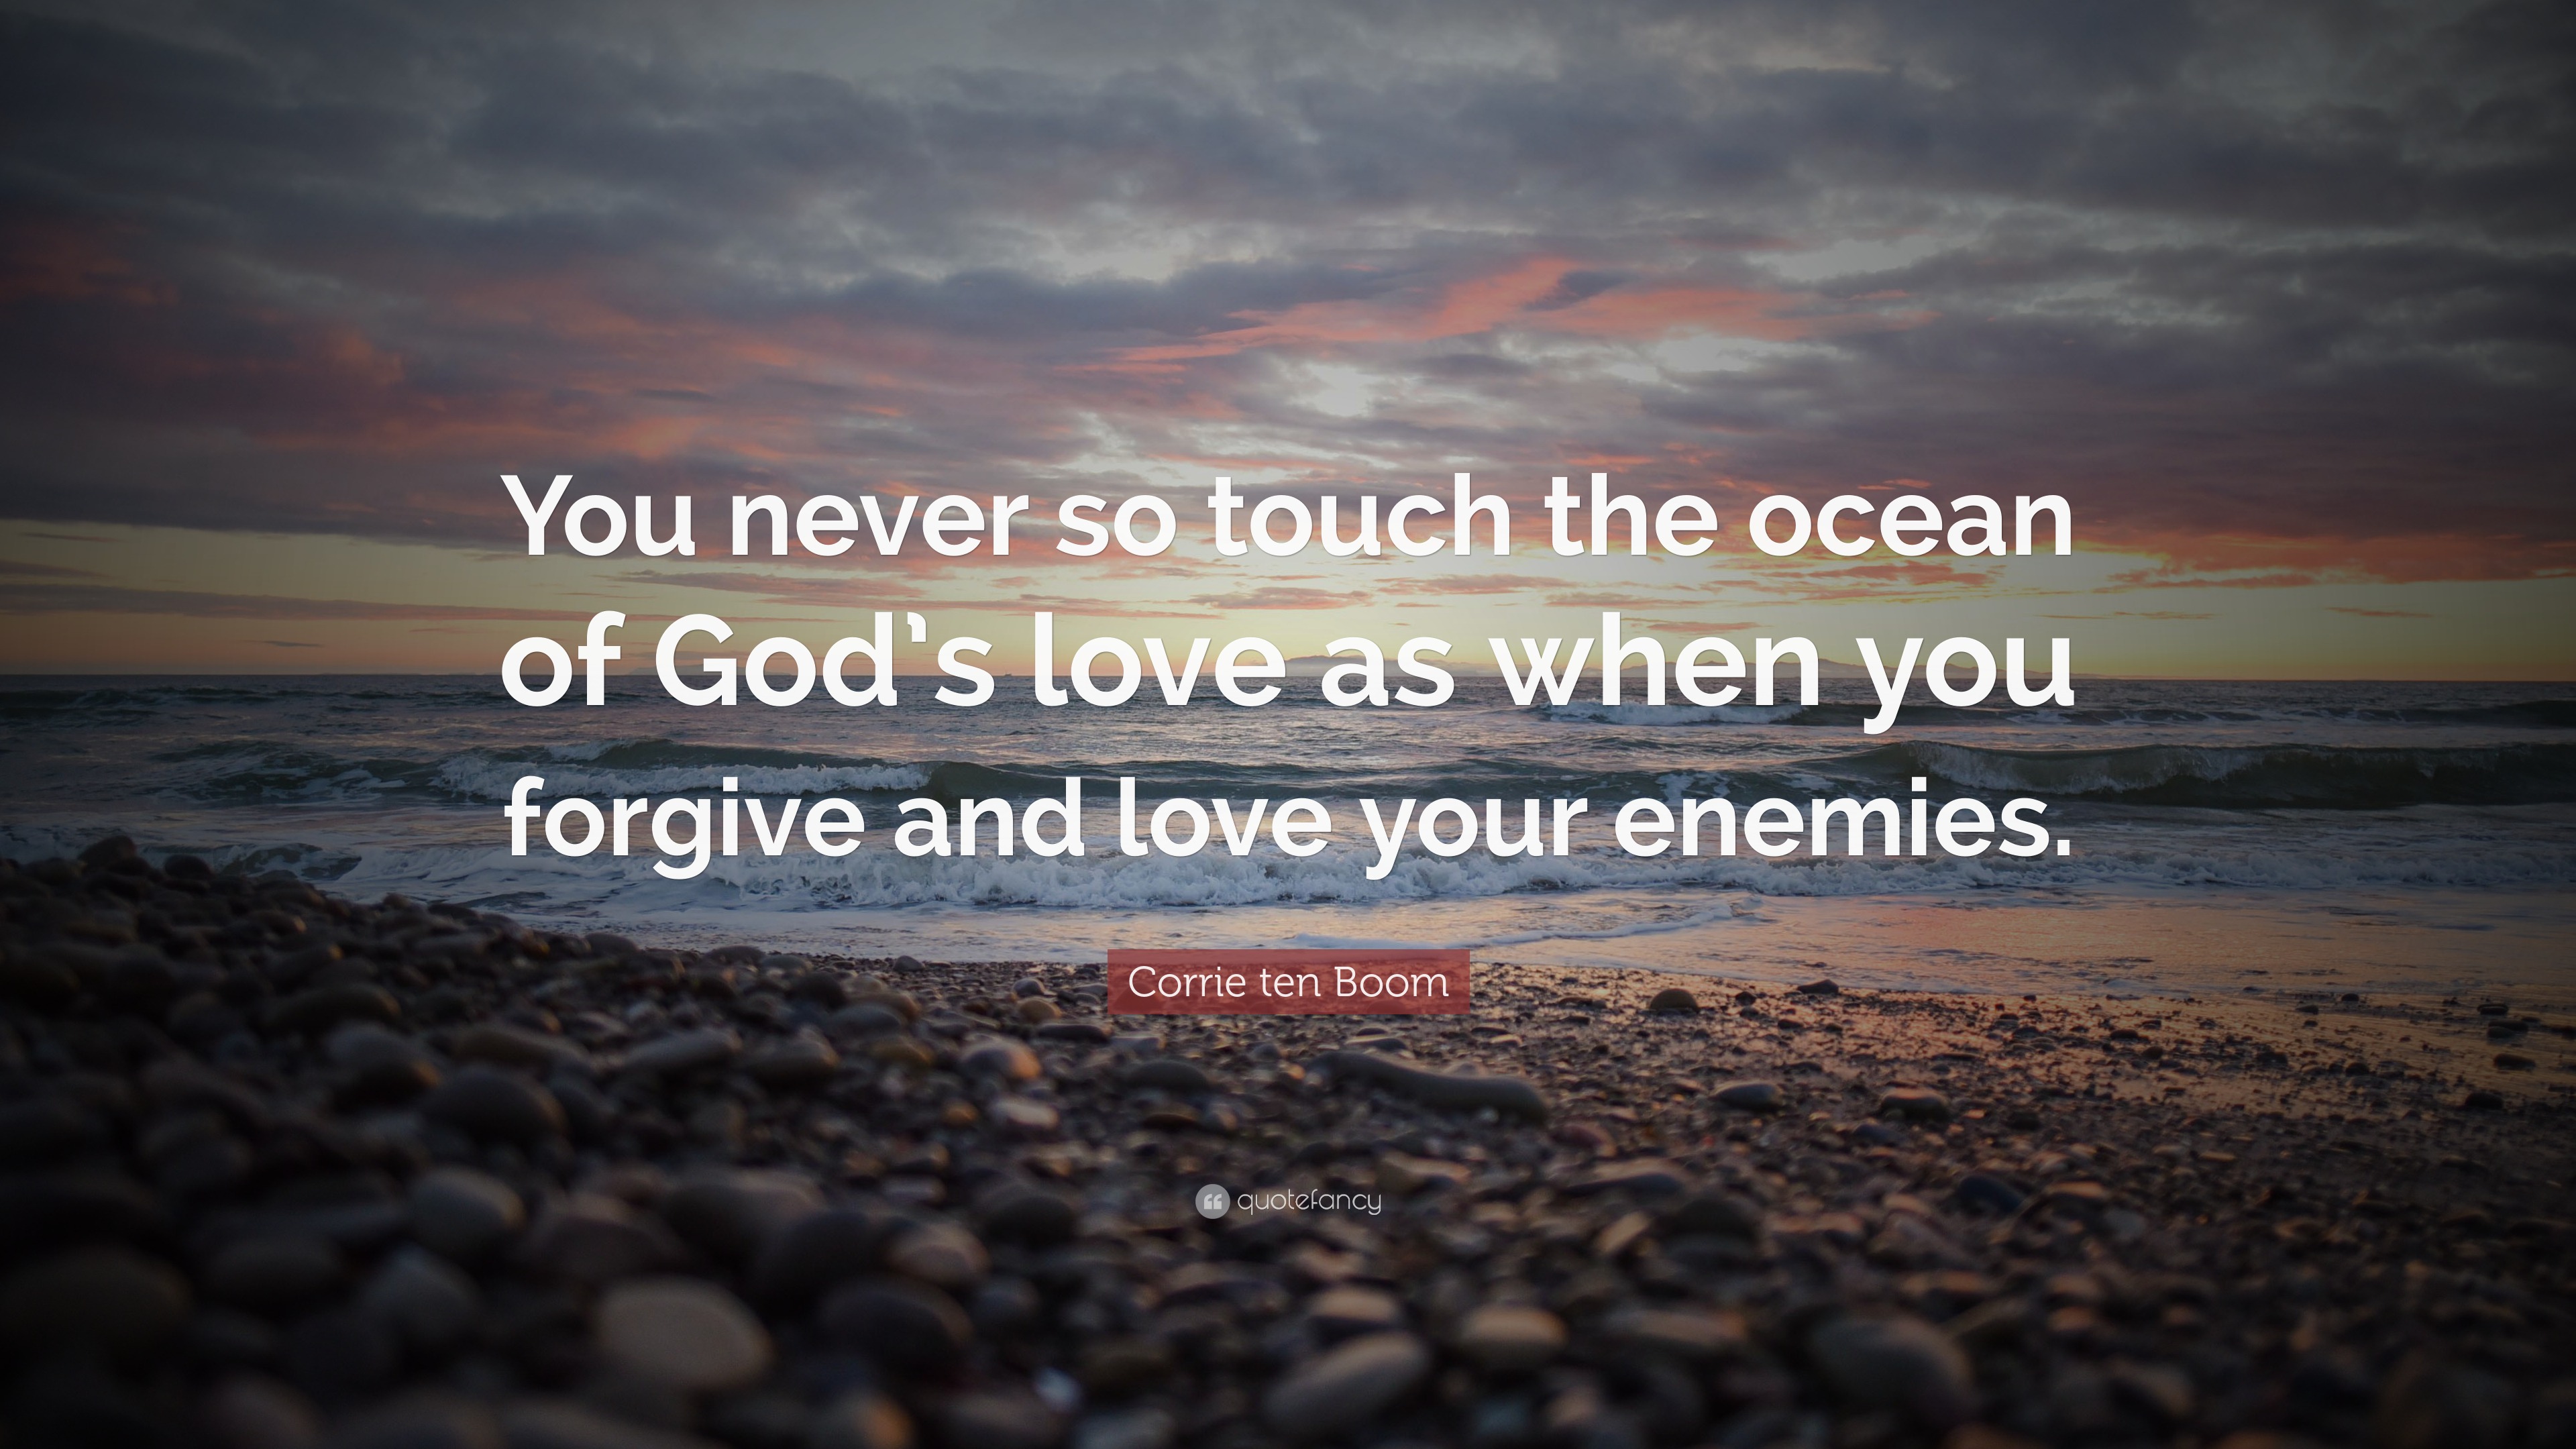 4709043 Corrie ten Boom Quote You never so touch the ocean of God s love